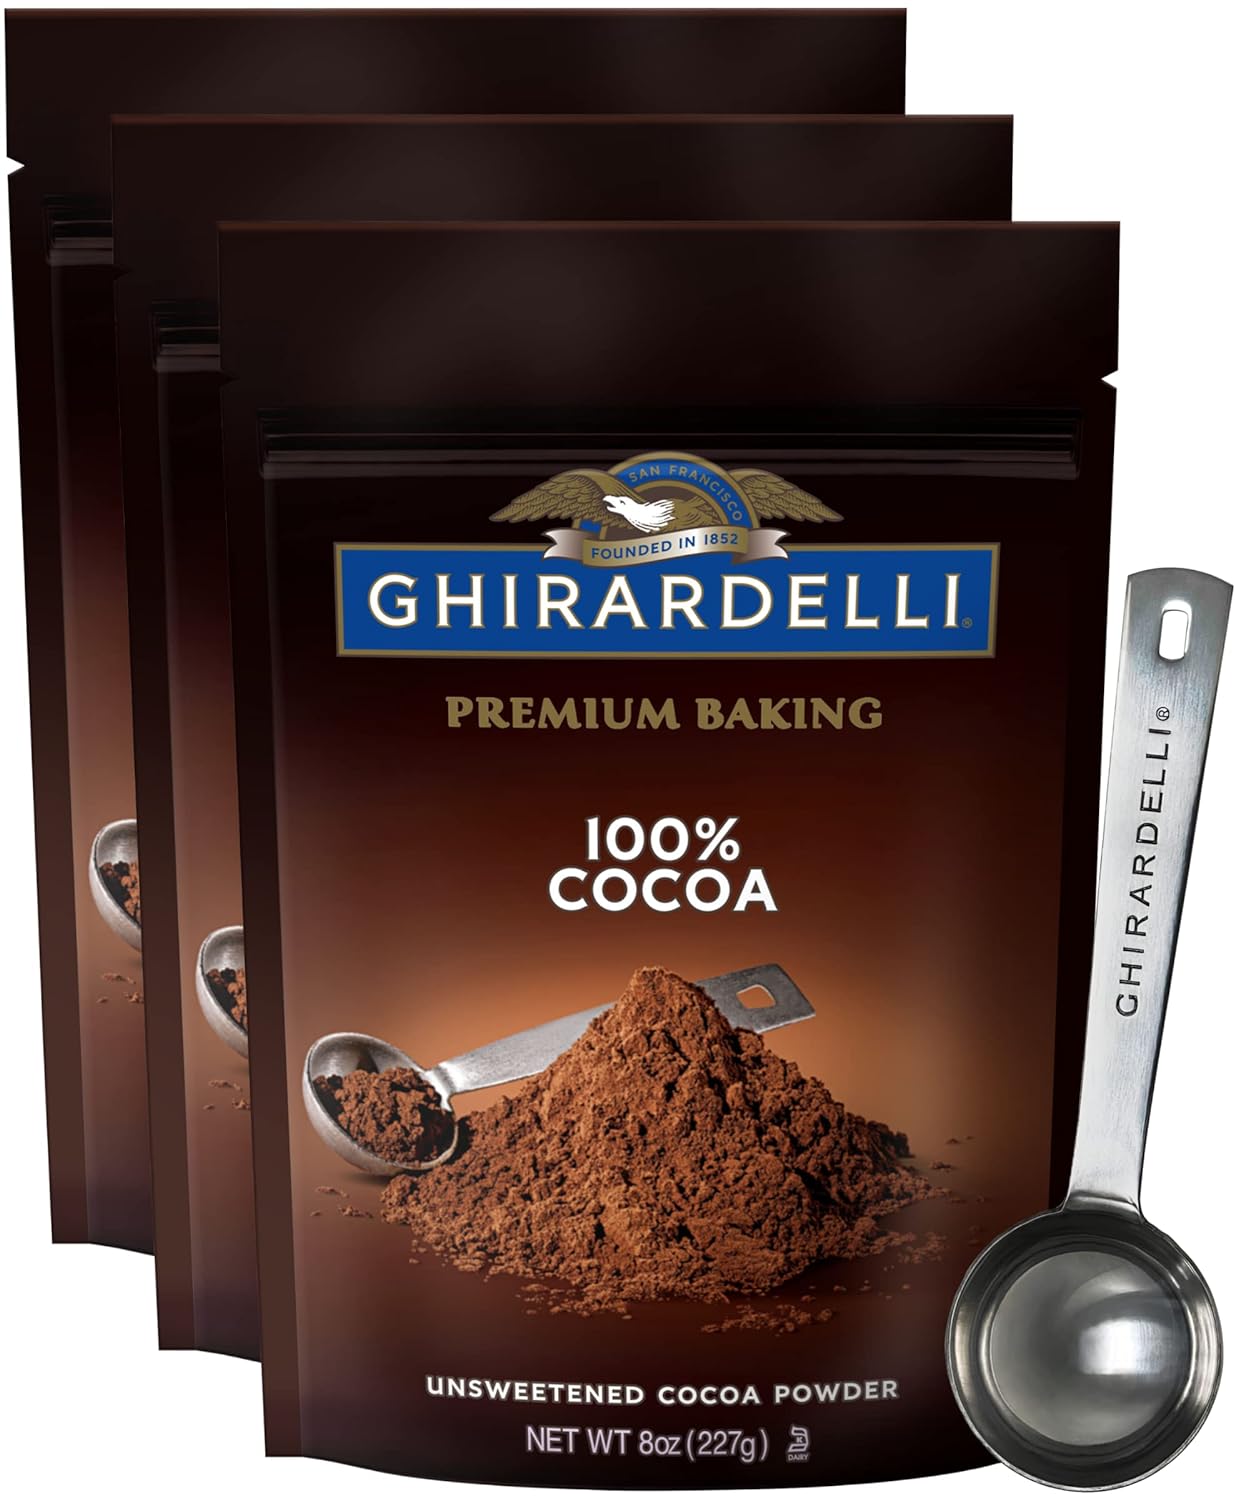 Ghirardelli Unsweetened Cocoa Powder Pouch 8 Ounce (Pack of 3) with Limited Edition Measuring Spoon